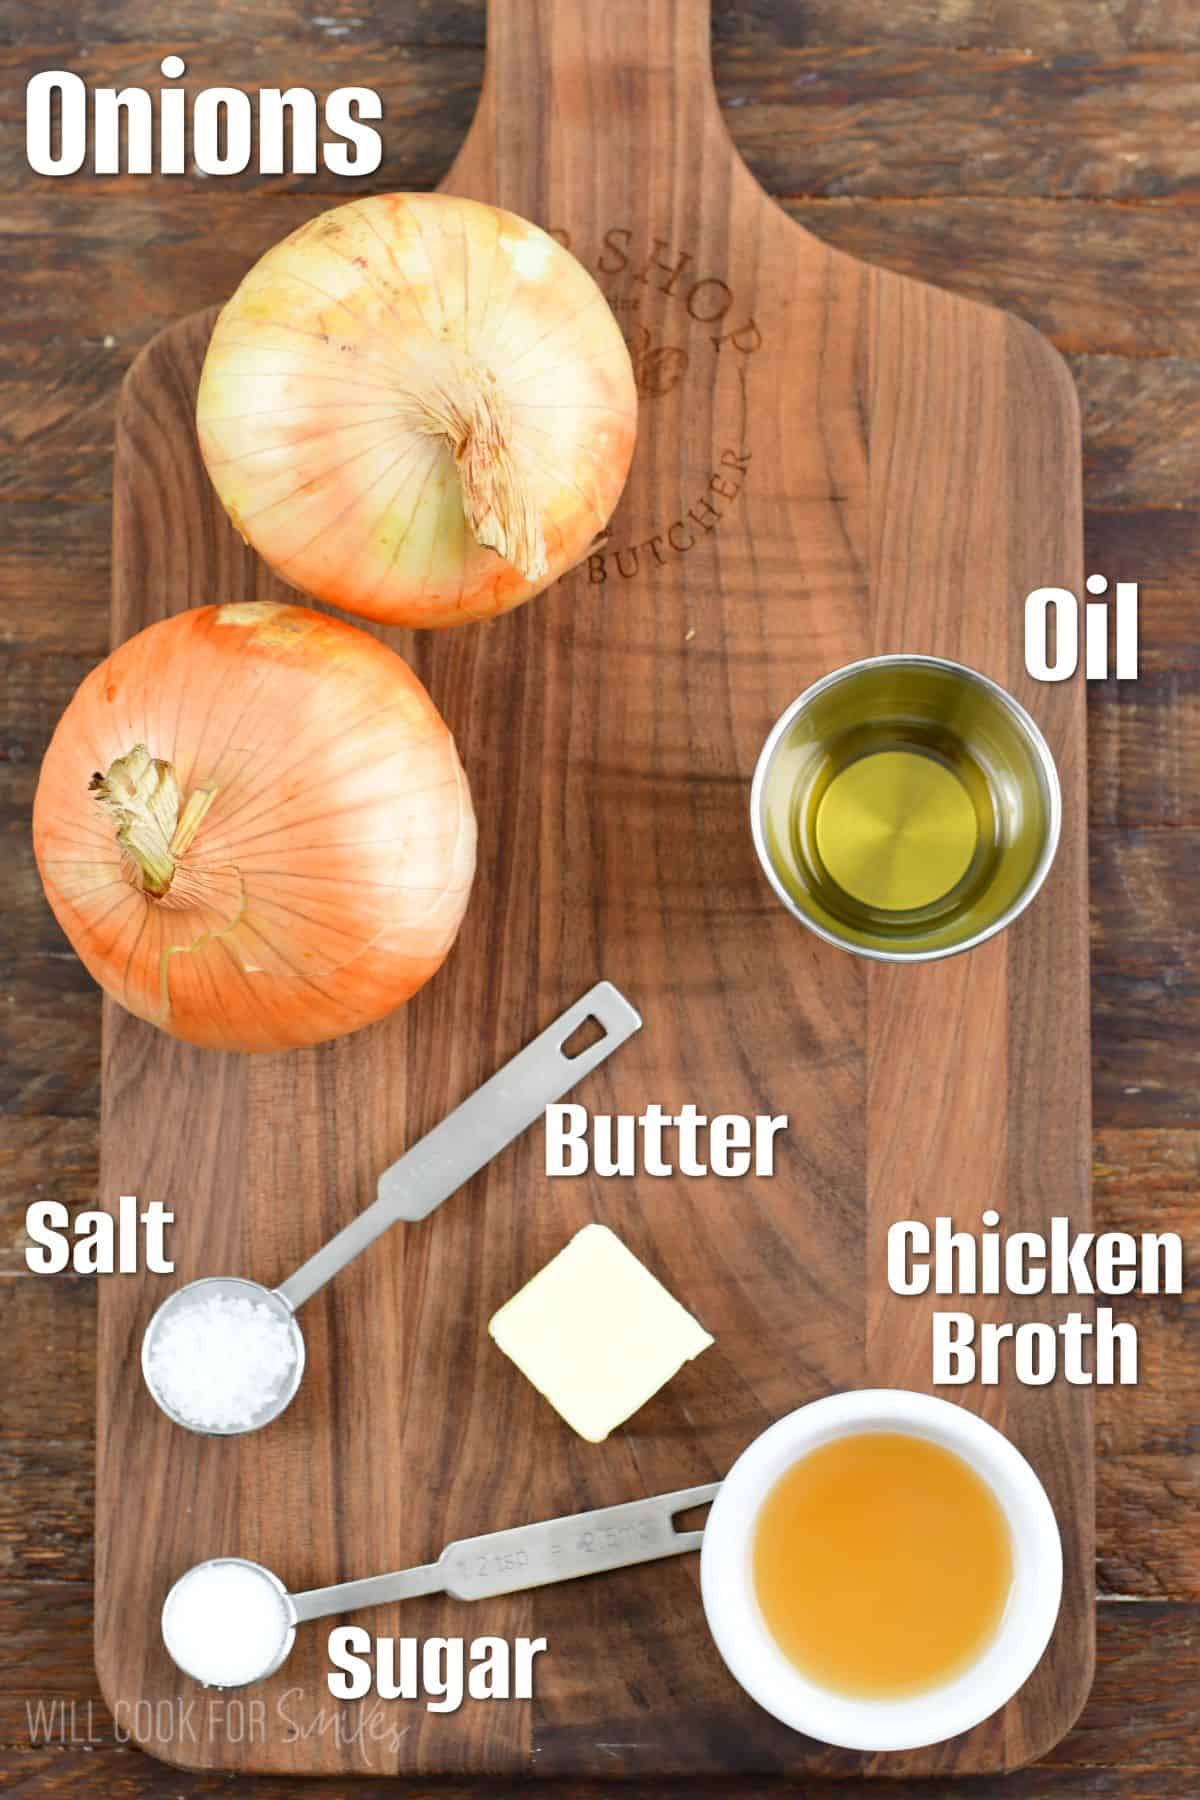 labeled ingredients to make caramelized onions on a wooden cutting board.